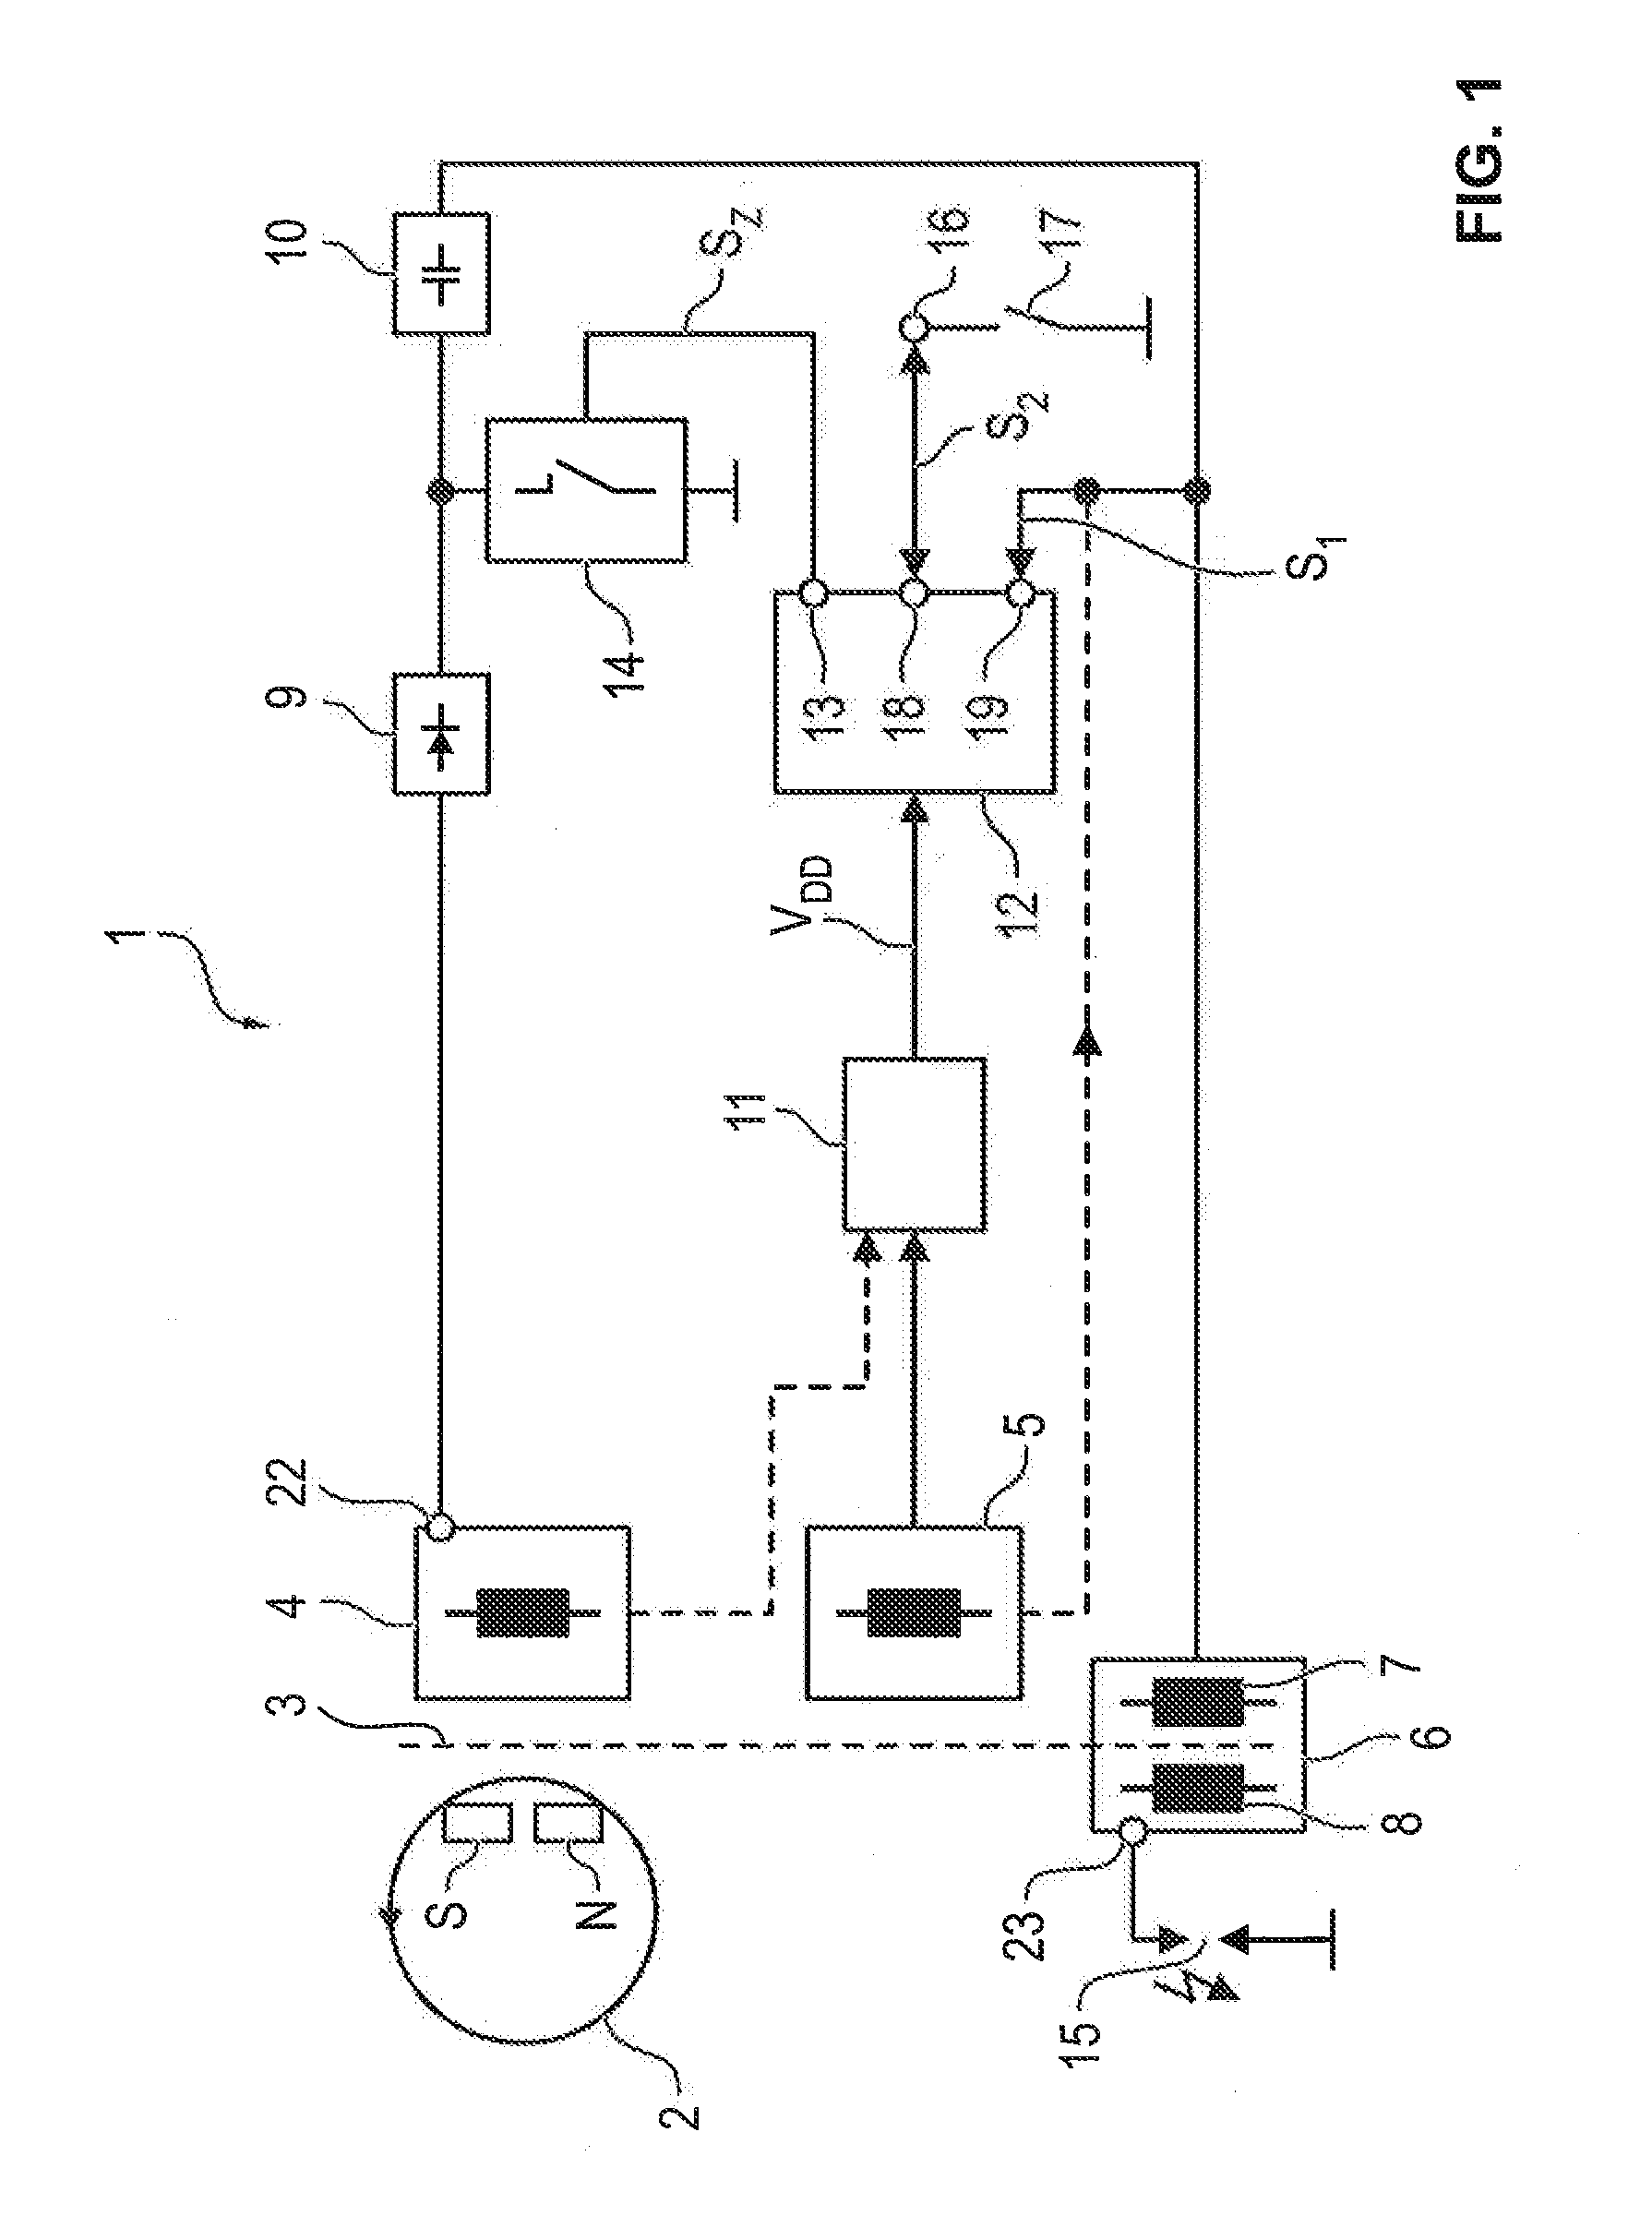 Ignition method for an internal combustion engine and an ignition device operated accordingly